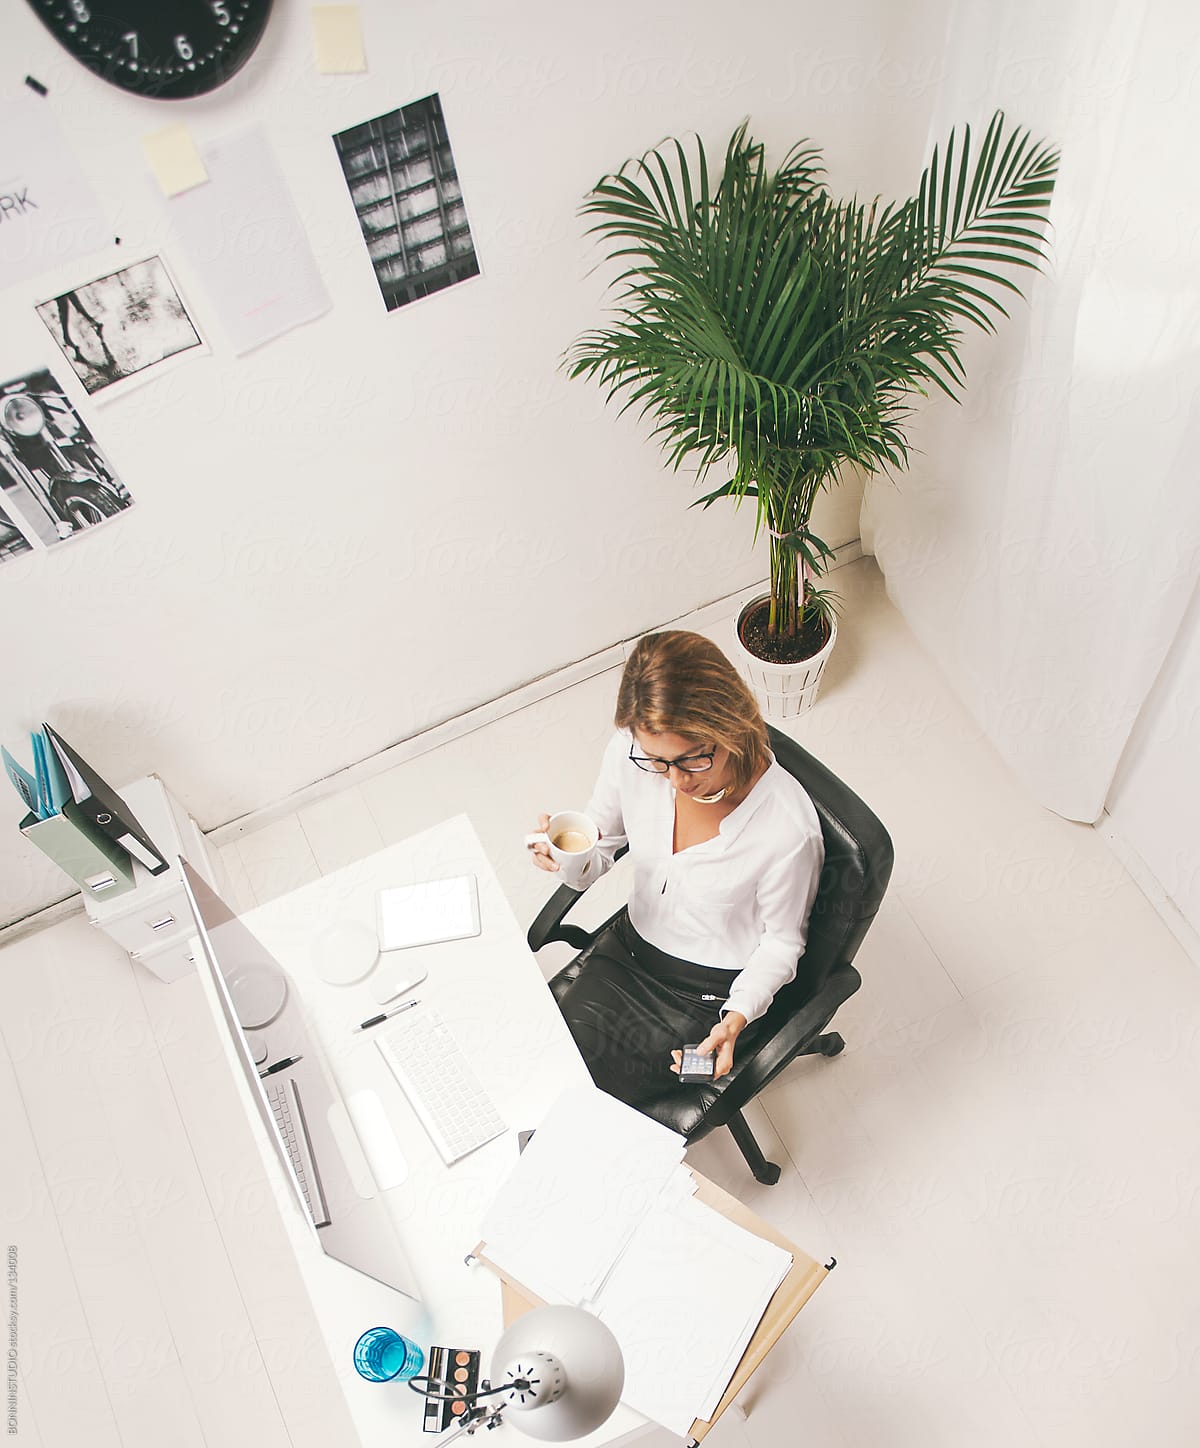 Aerial view of mature business woman working at office.